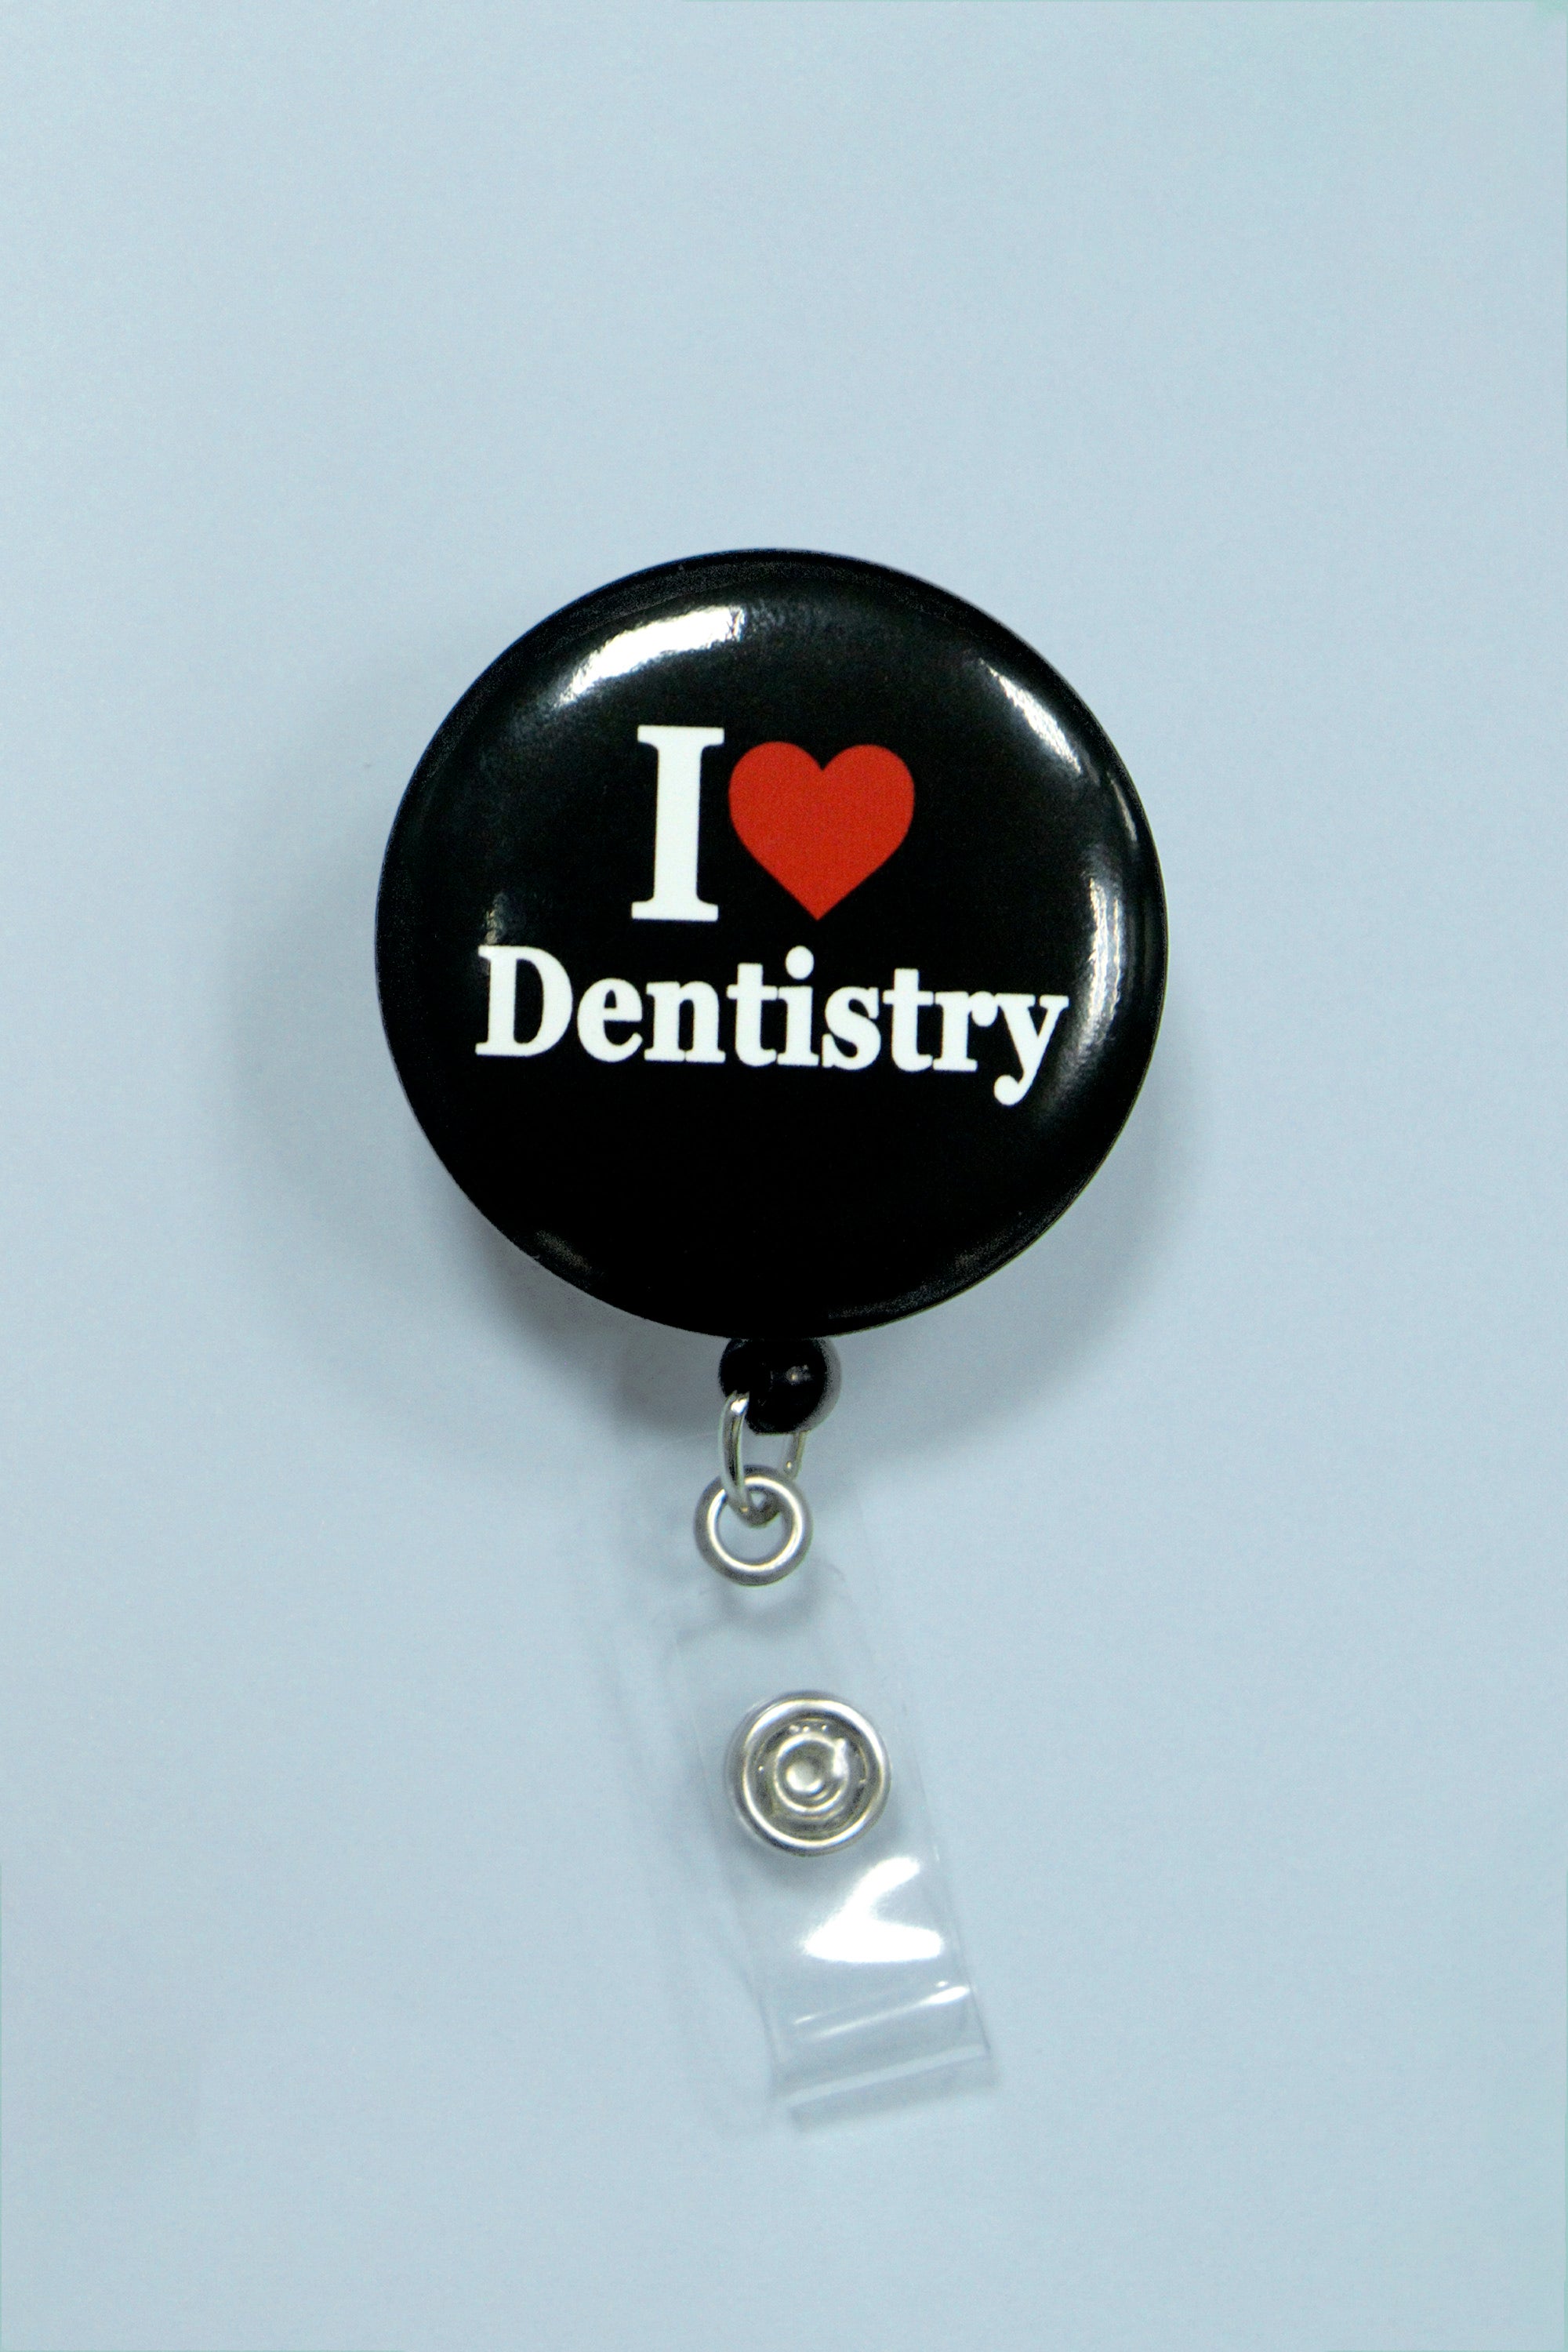 products-dentistry1-jpg